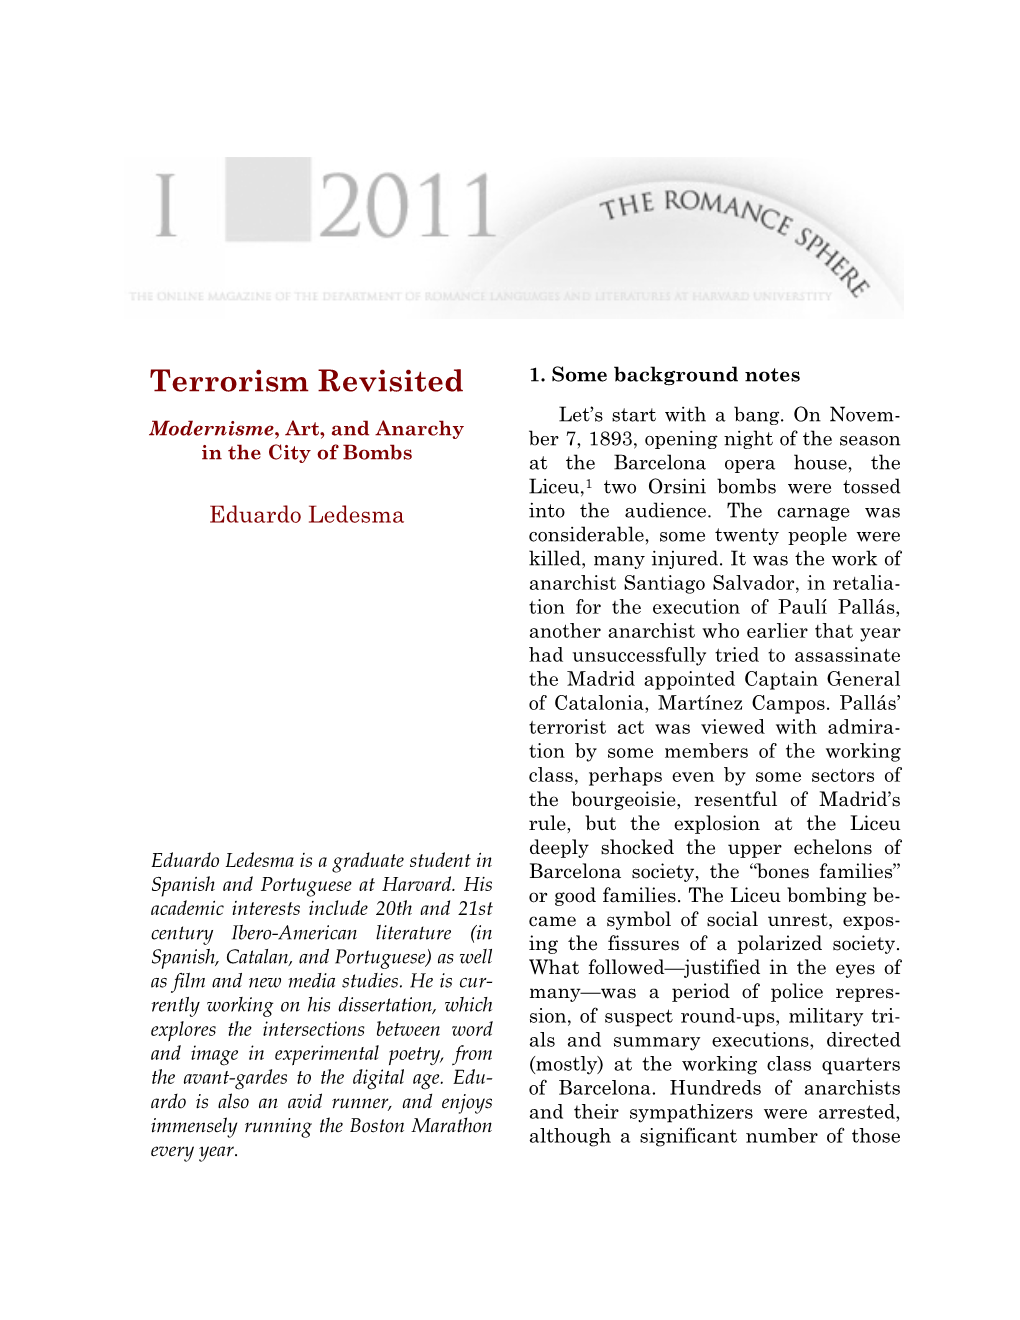 Terrorism Revisited May 2011